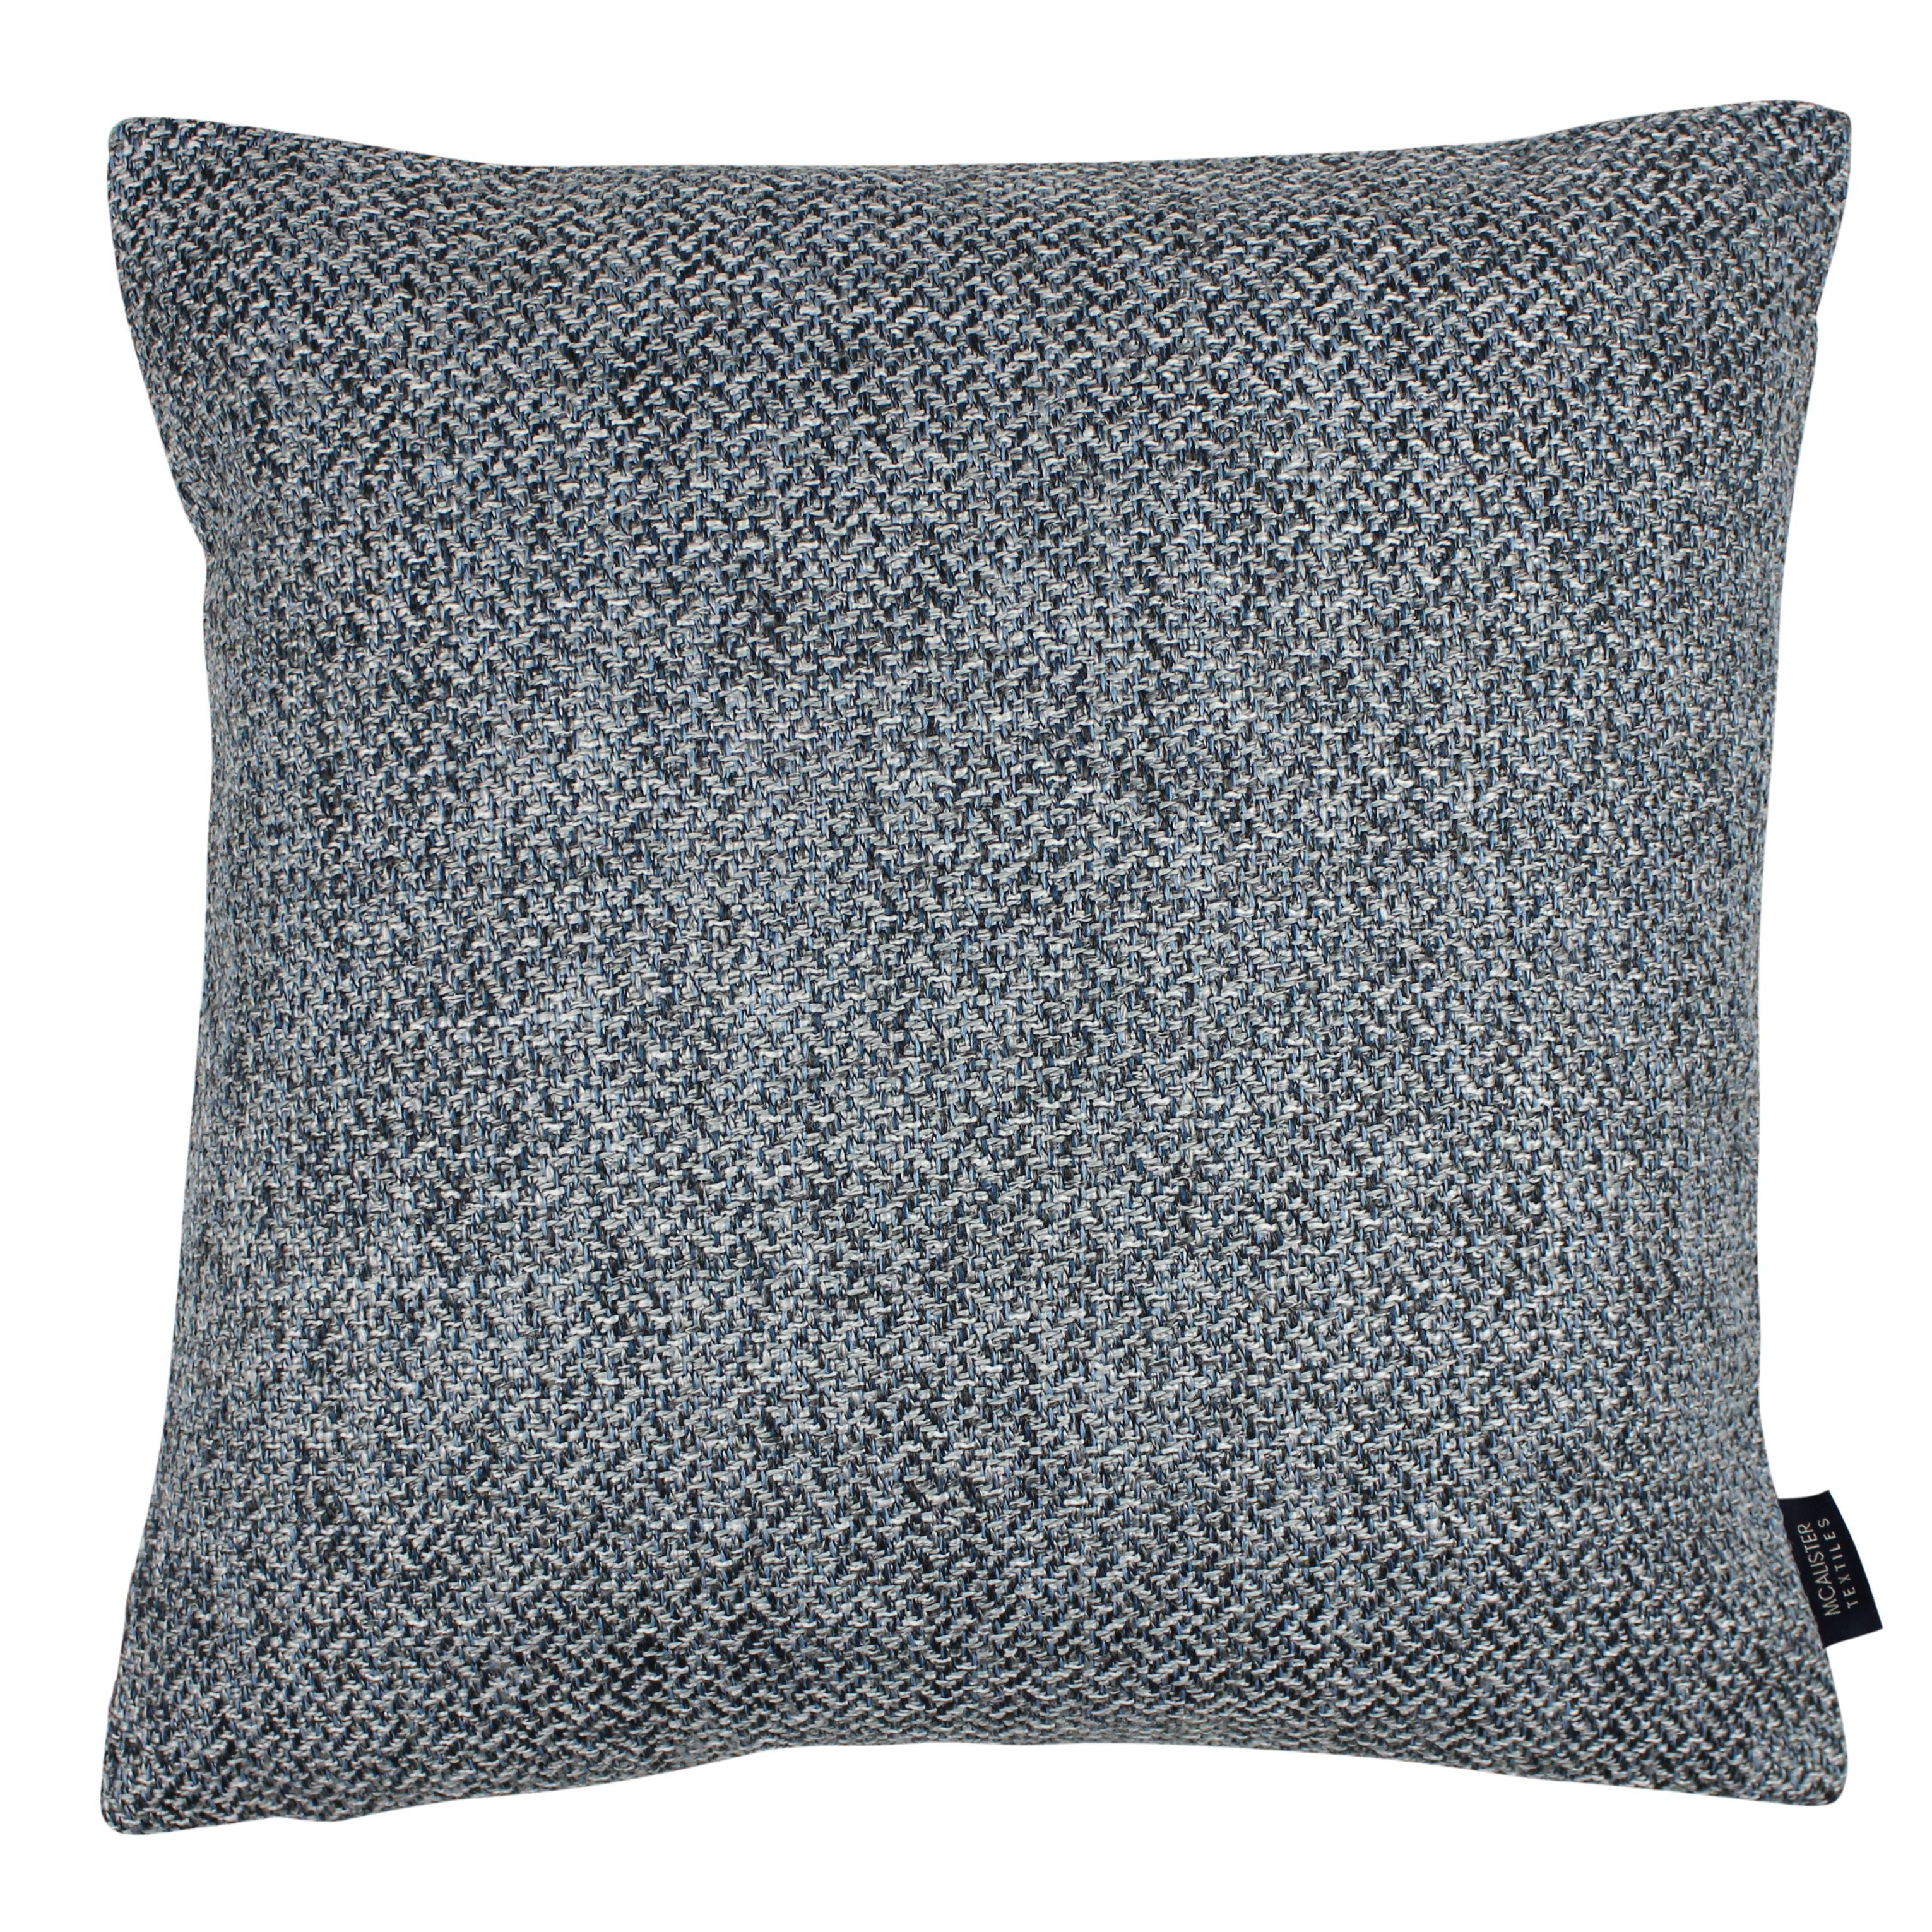 McAlister Textiles Harris Tweed Cushion - Blue & Grey Cushions and Covers Cover Only 43cm x 43cm 